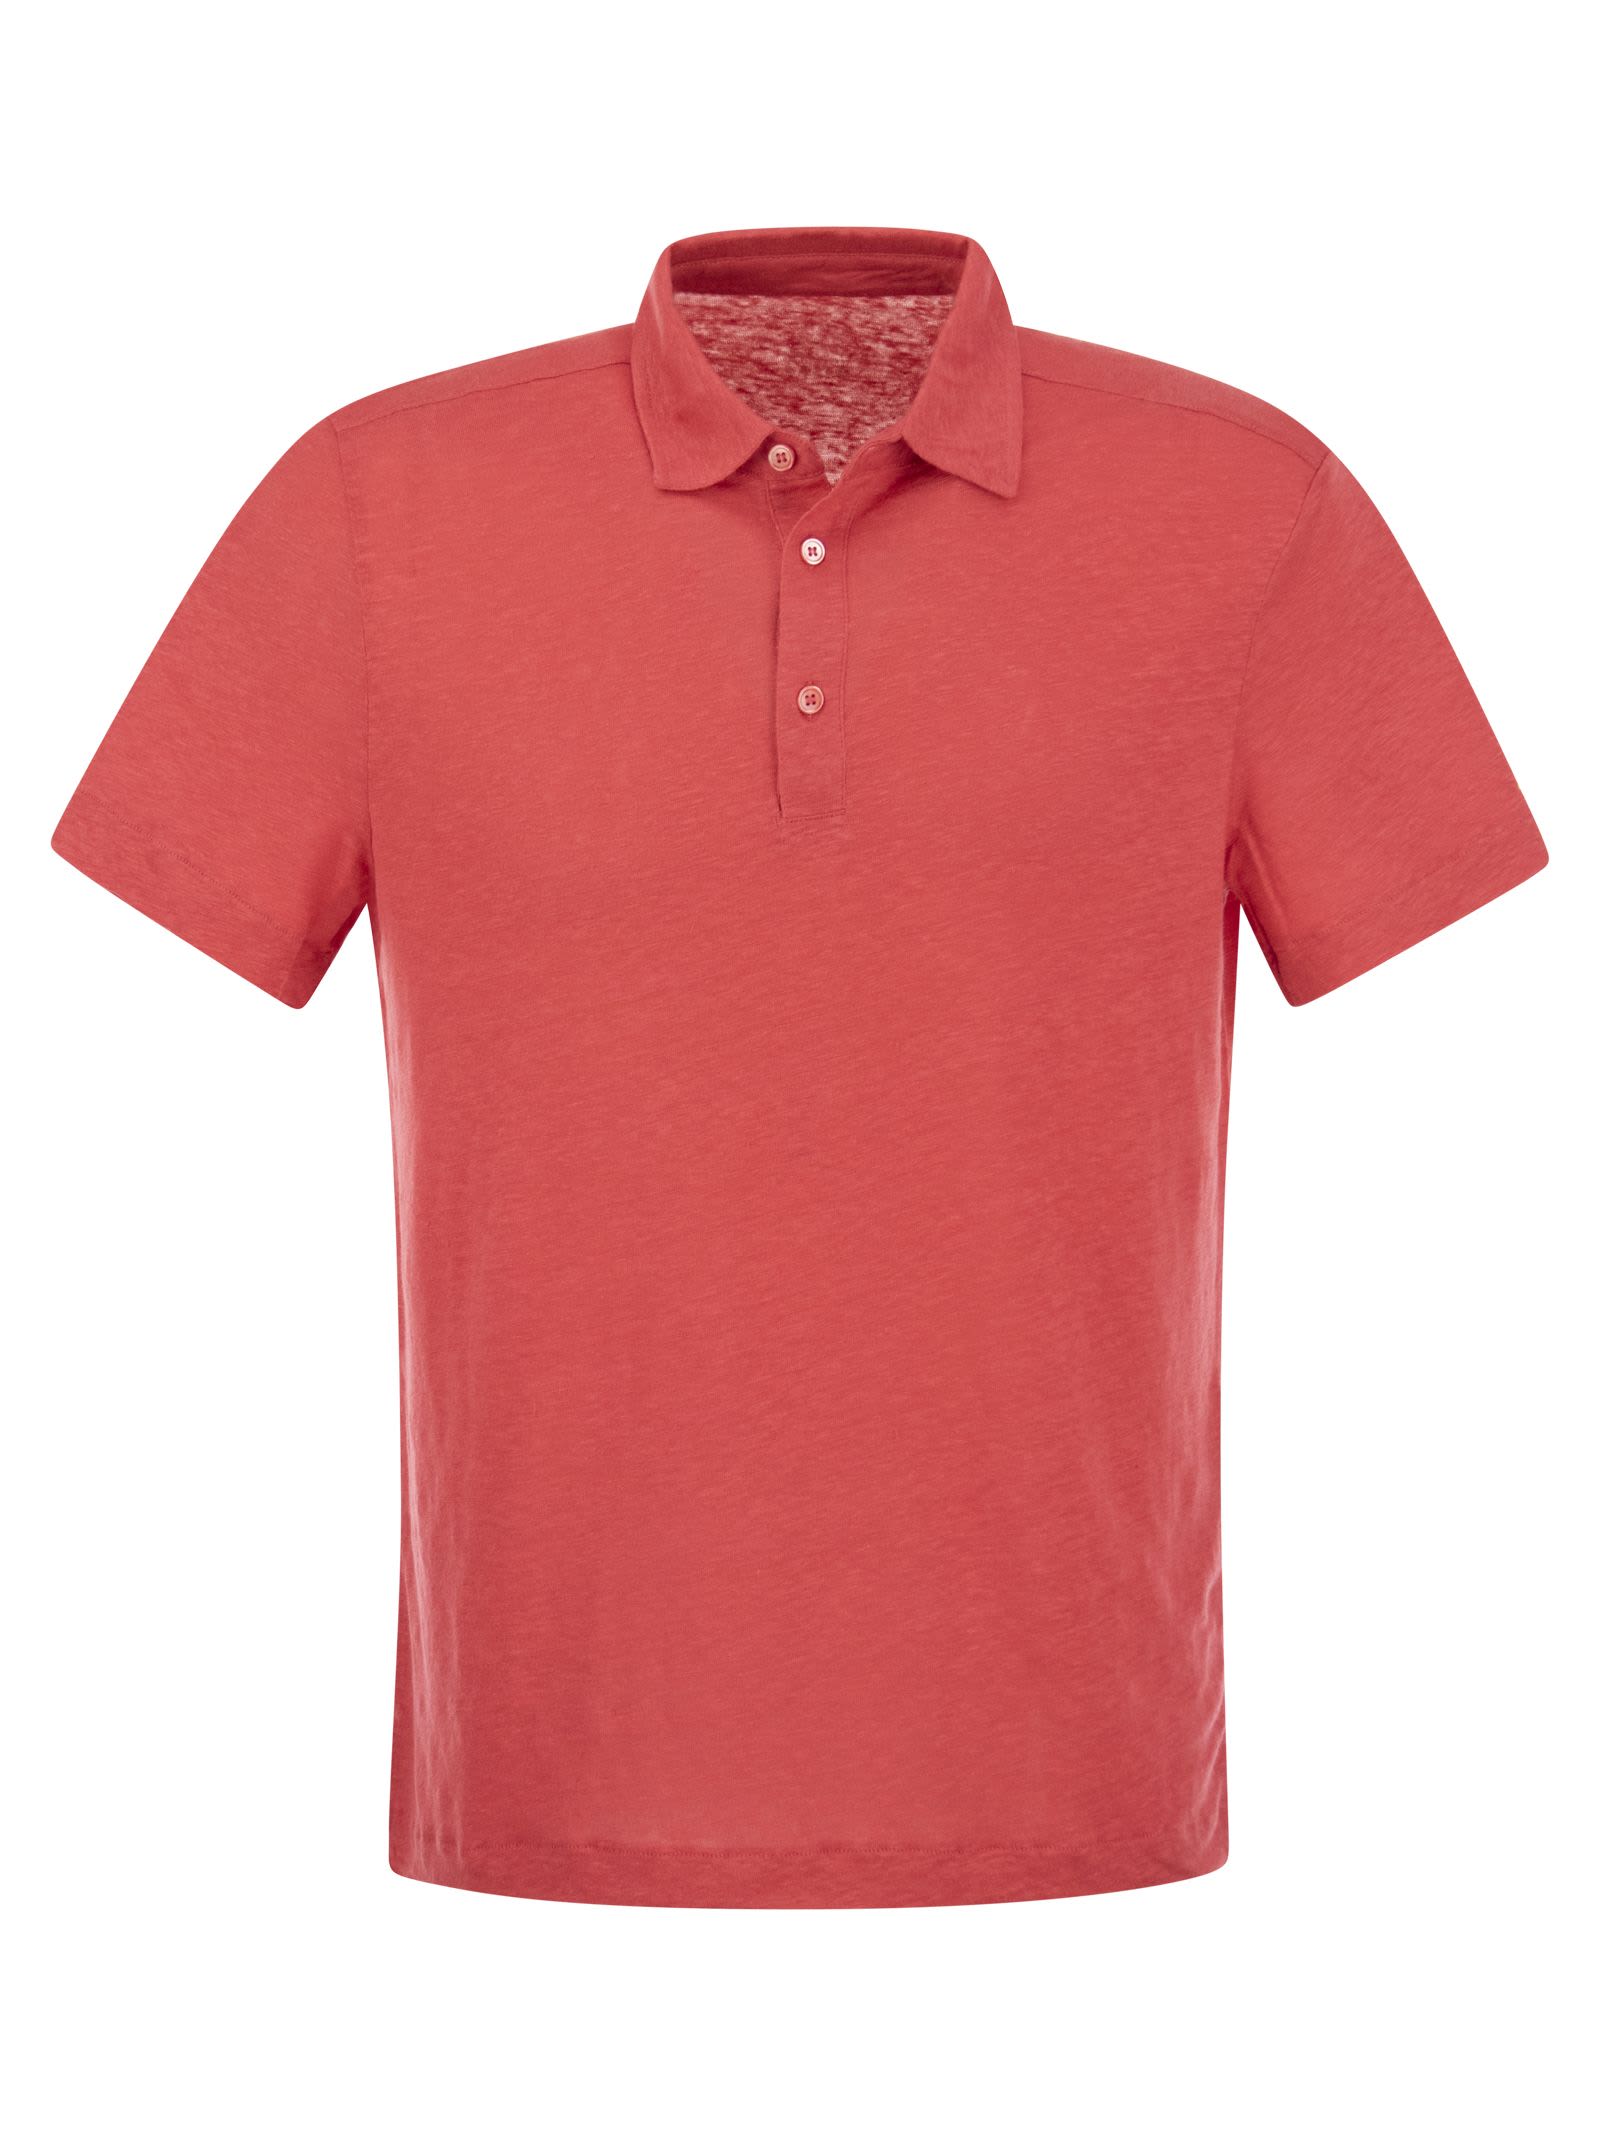 MAJESTIC LINEN POLO SHIRT WITH BUTTONS